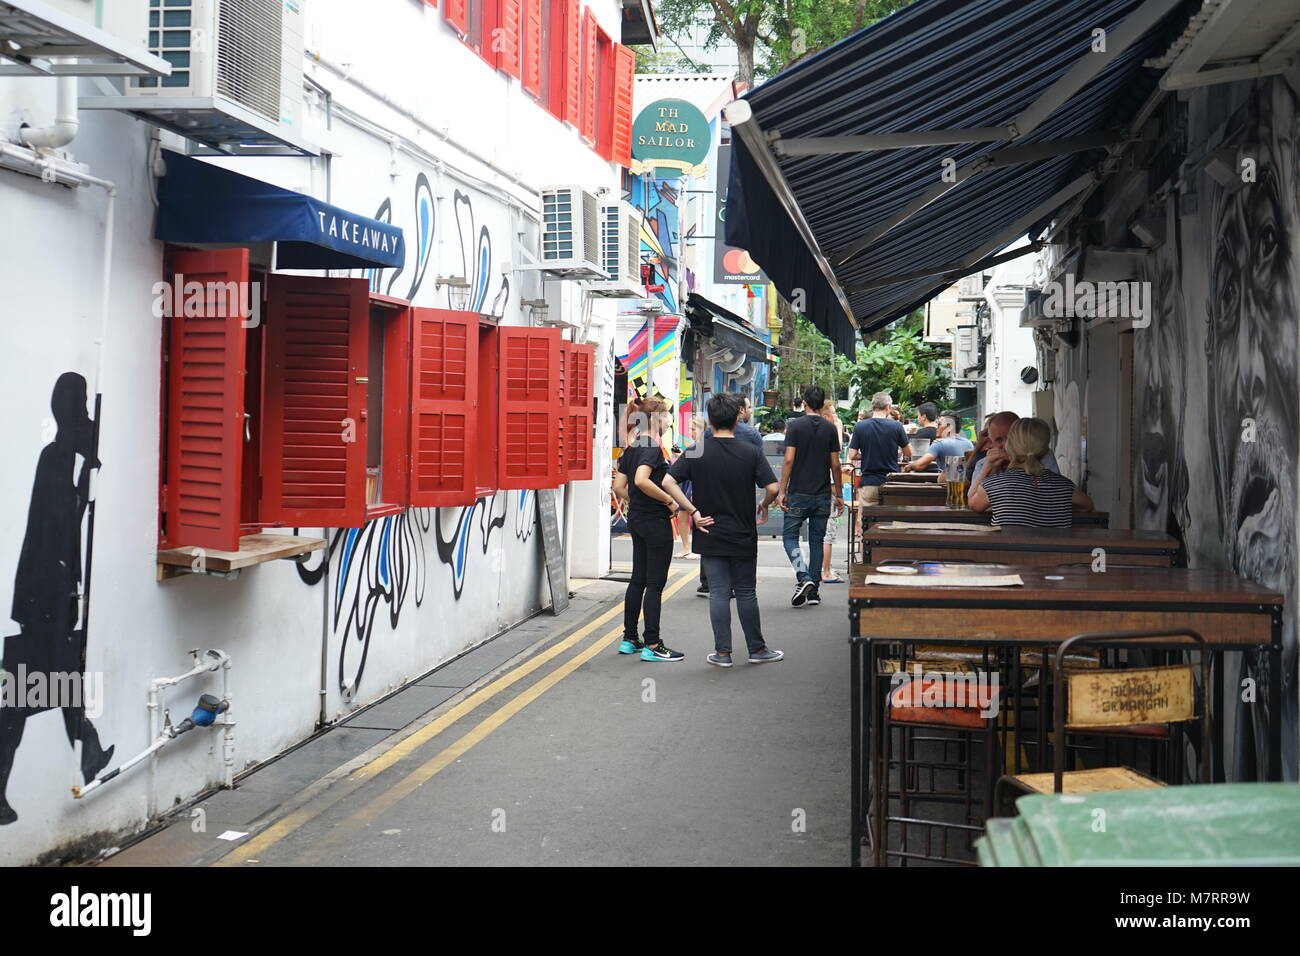 Arab street - One of the best street to hangout in Singapore which has very unique restaurants and has colorful painted walls Stock Photo